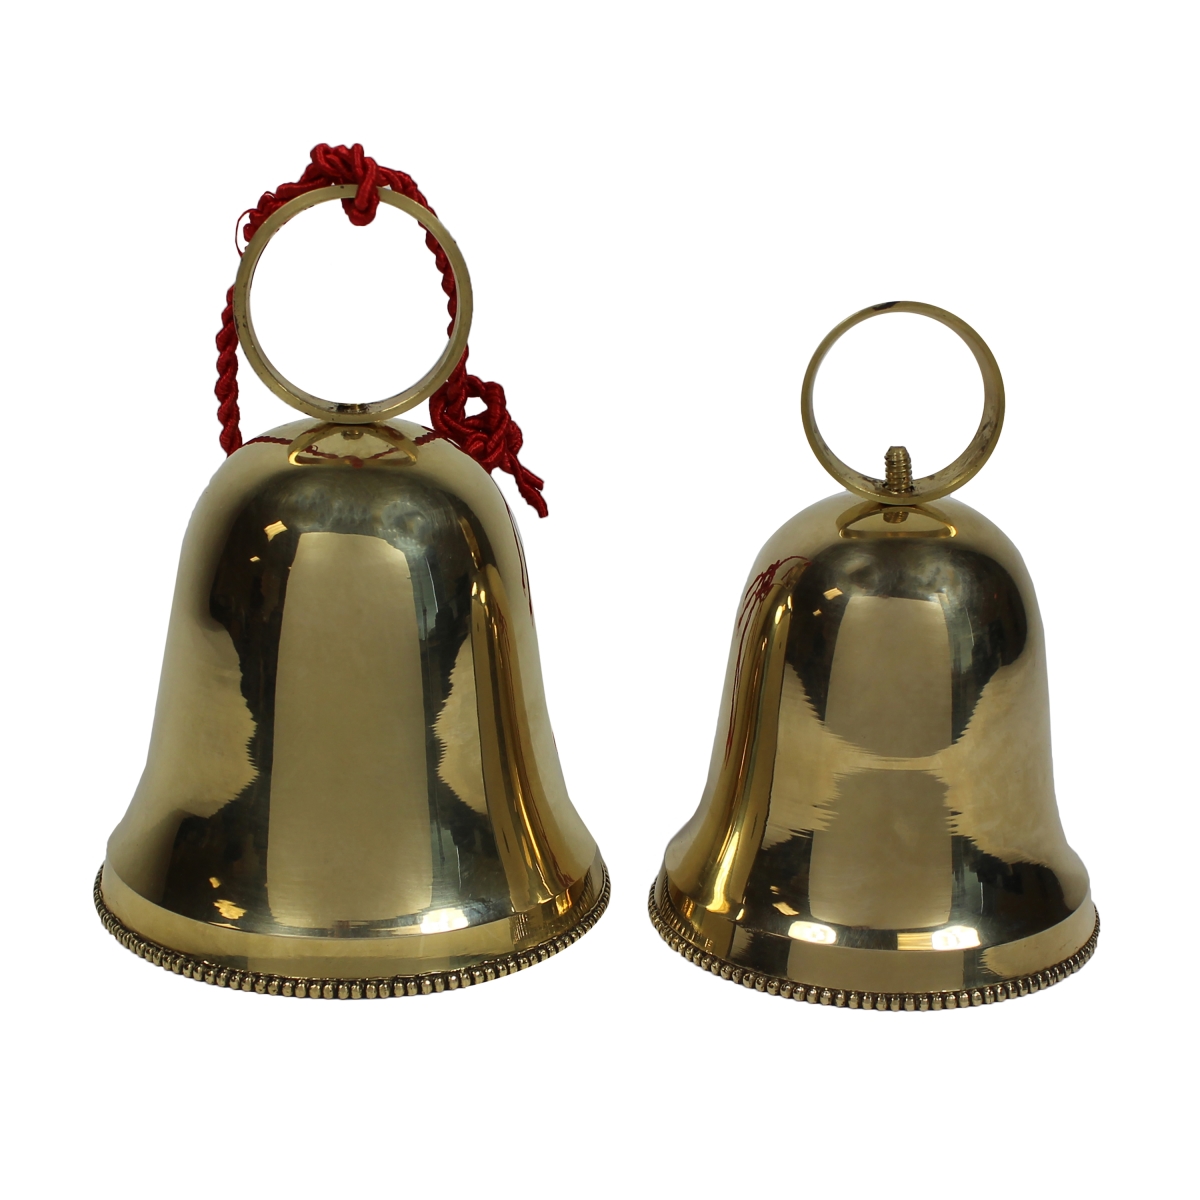 Urban Designs 8800103 Handcrafted Solid Brass Christmas & Holiday Bell Set - 2 Piece